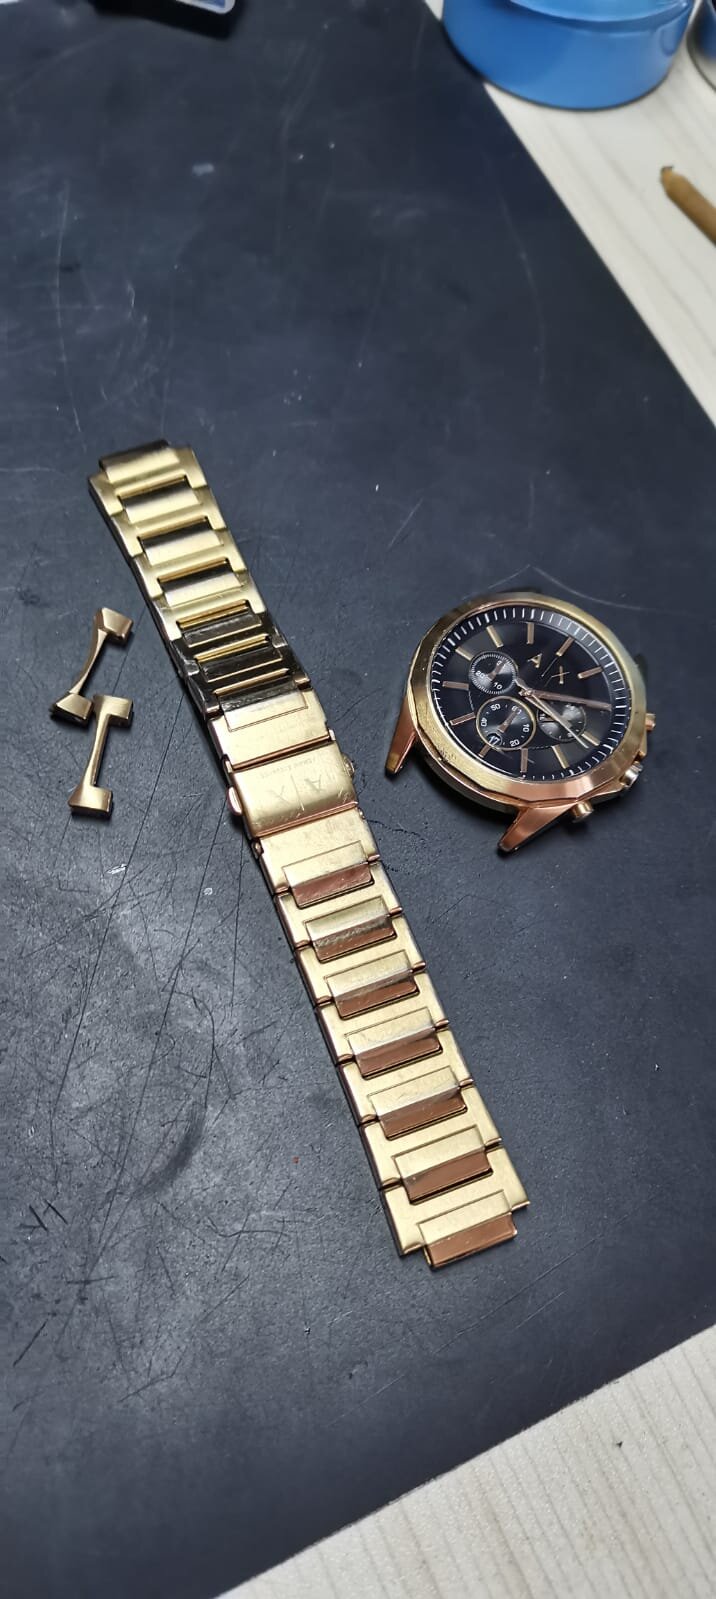 Armani Exchange in from Fixed new Watch links | 111811 North and AX Watches battery, Latest for clean AX2611 Watch | News glass | repair removal, London. Watch Repairs Hub watch 